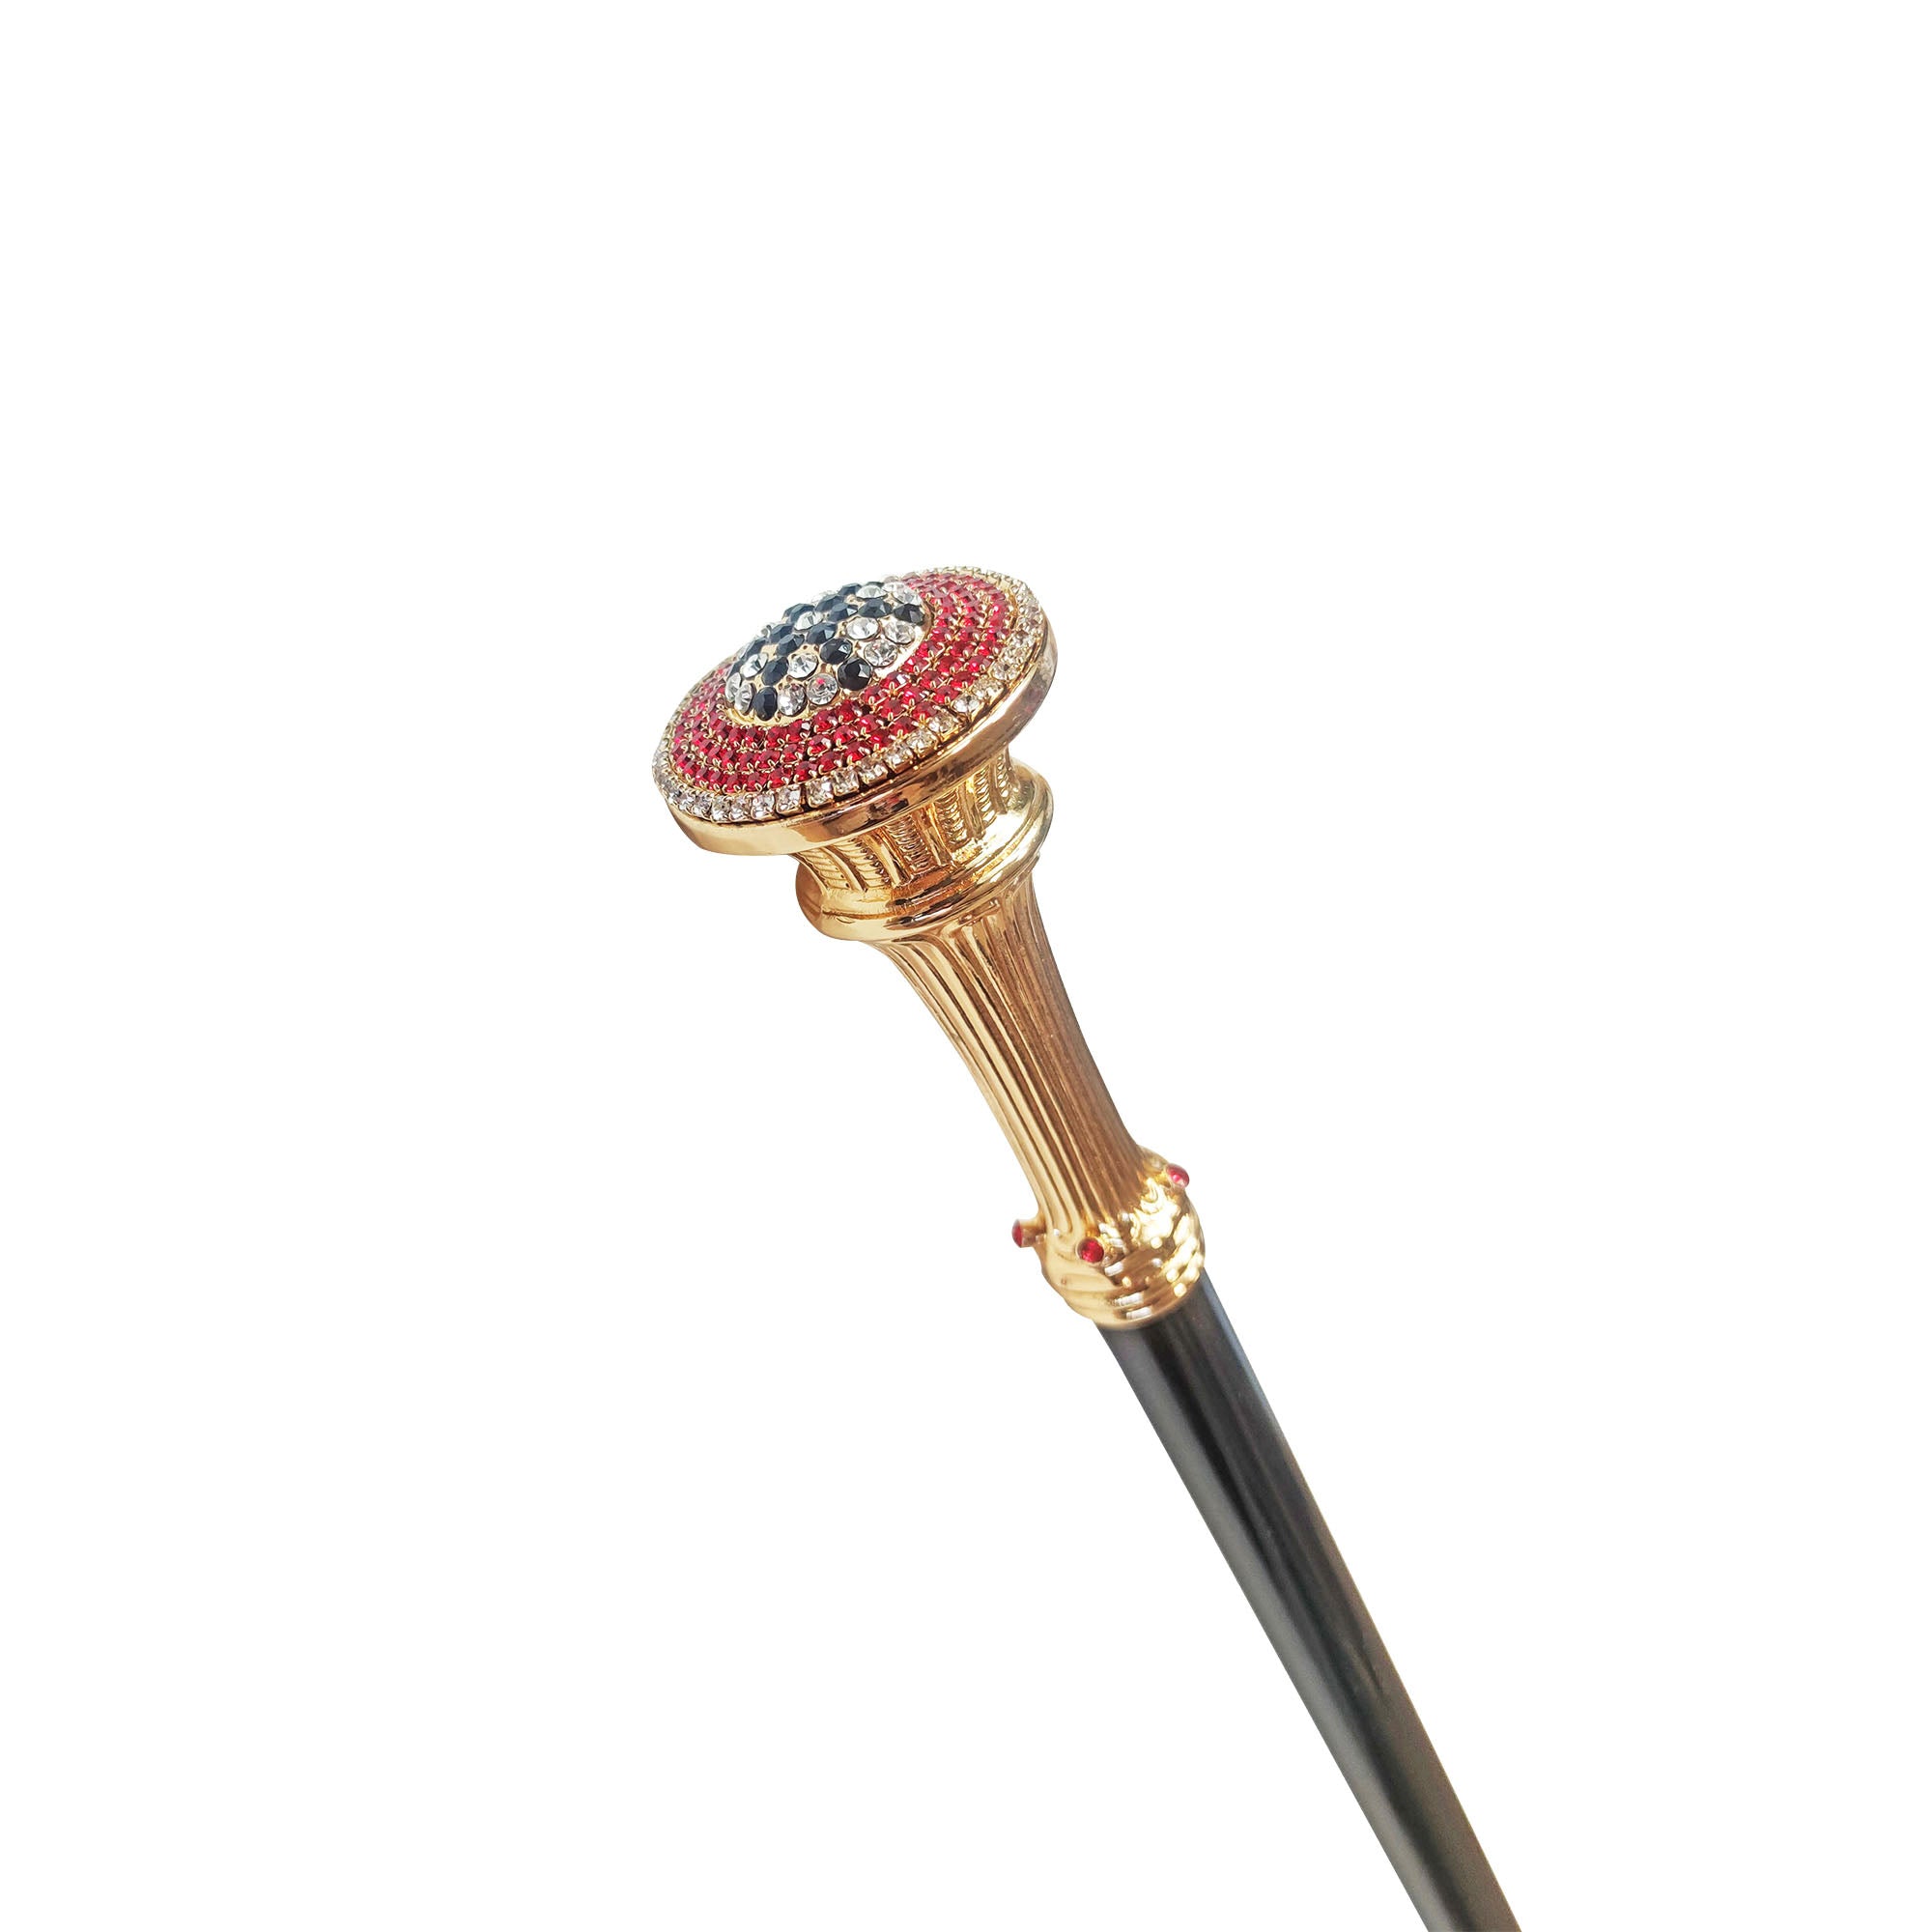 Amazing Walking stick with Red-White-Black crystals